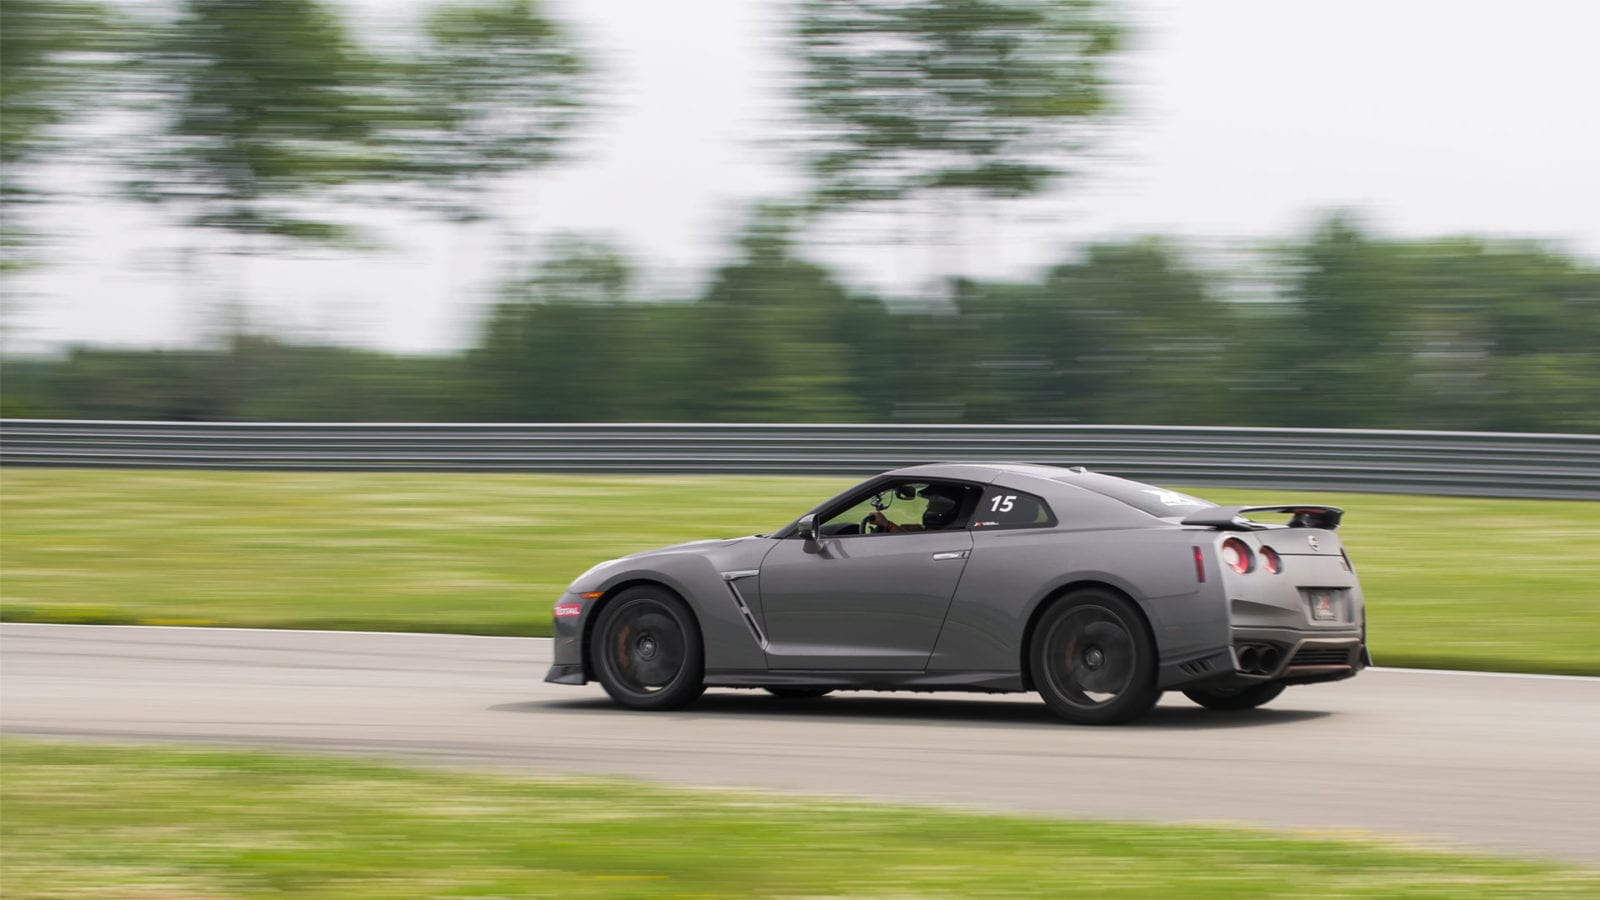 Nissan GT-R on the racetrack